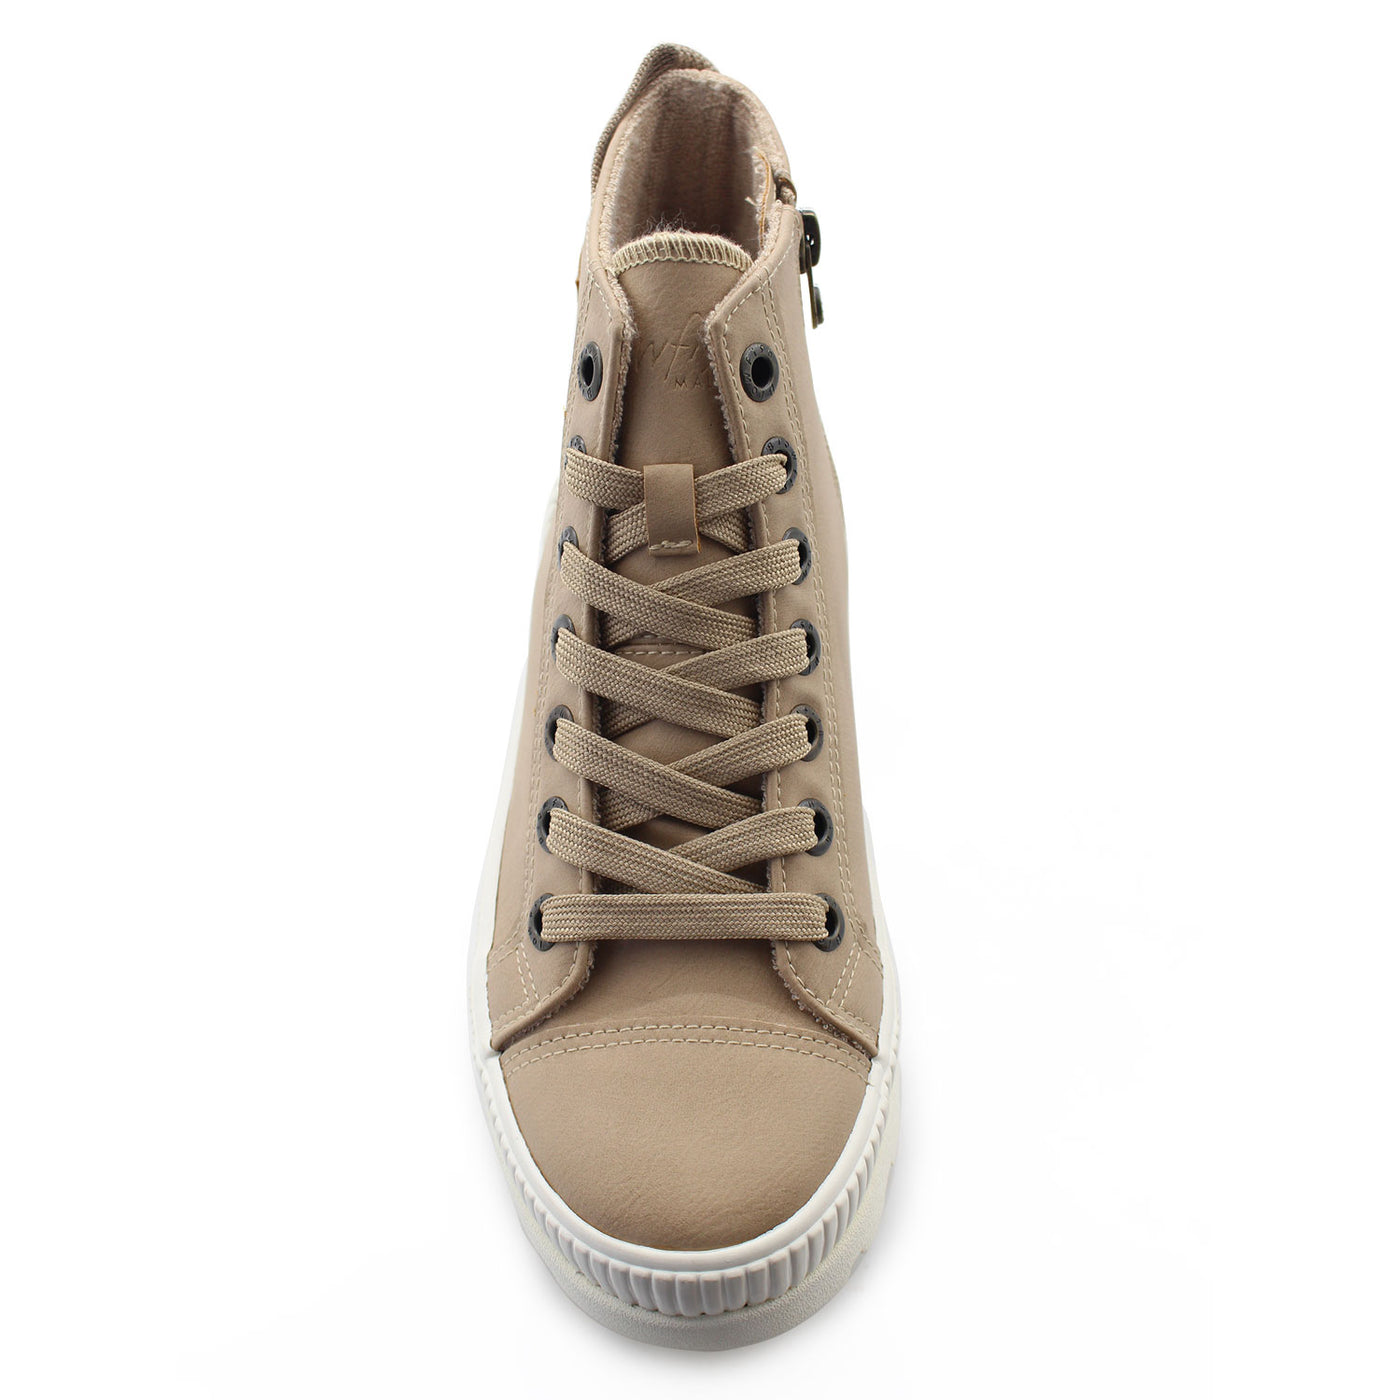 Blowfish Forever B Venus HiTop Sneaker  - Natural Whisky  - PLEASE CALL FOR SIZE AVAILABILITY